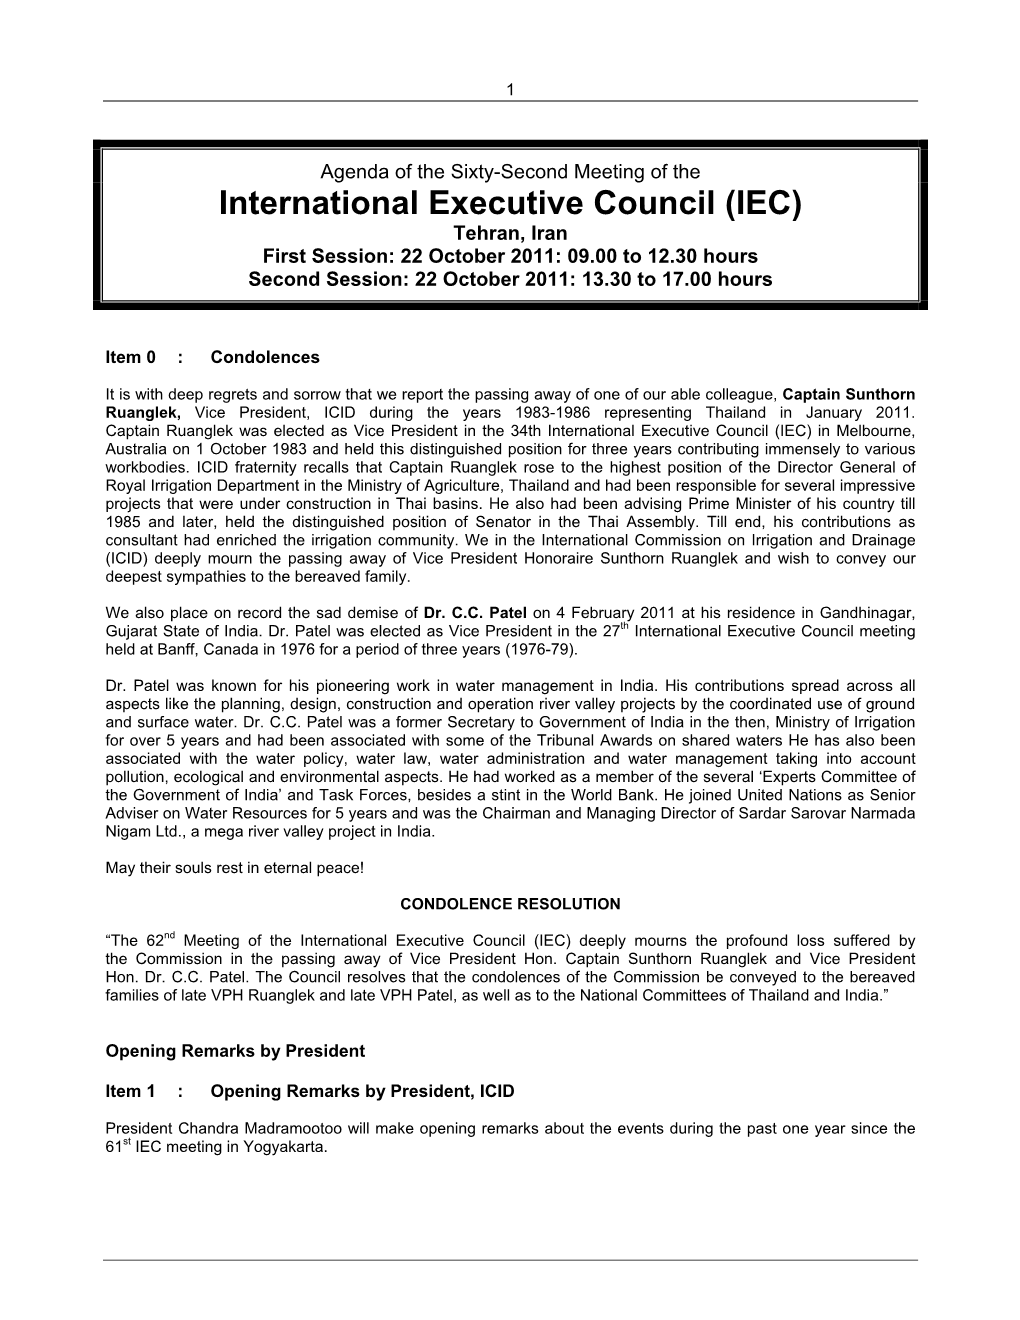 IEC) Tehran, Iran First Session: 22 October 2011: 09.00 to 12.30 Hours Second Session: 22 October 2011: 13.30 to 17.00 Hours